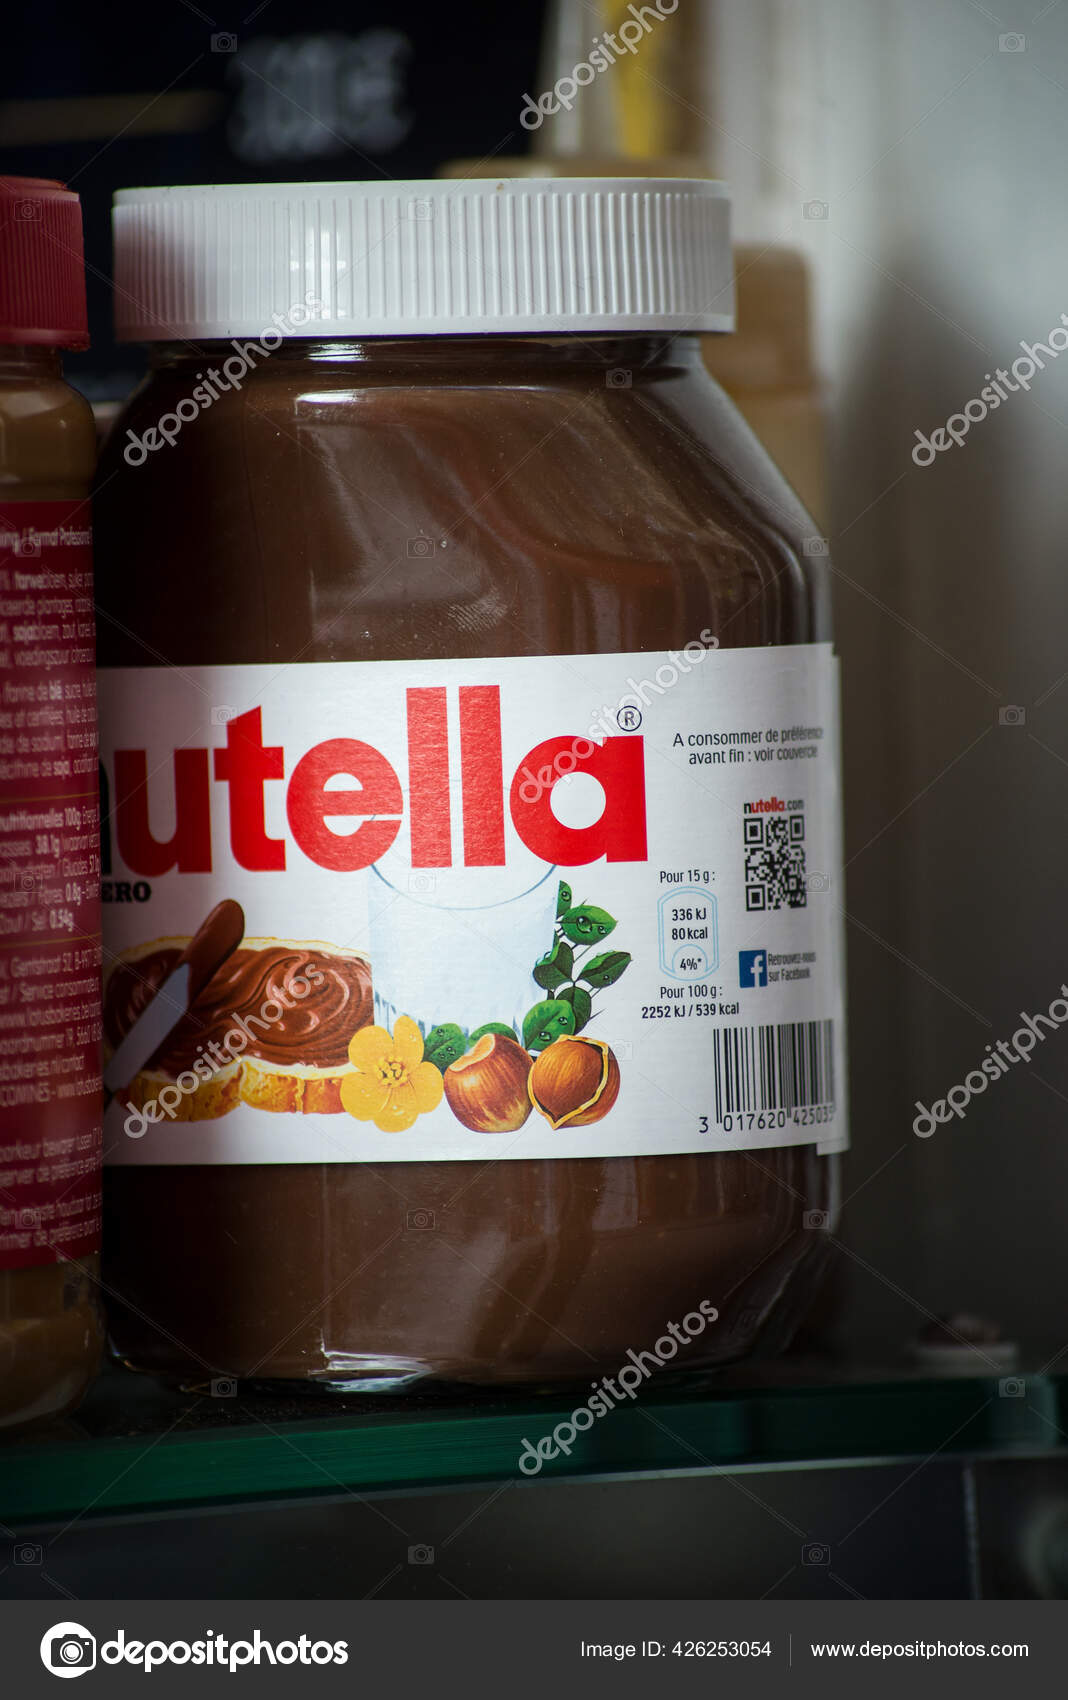 Mulhouse France December 2018 Closeup Mini Nutella Container White